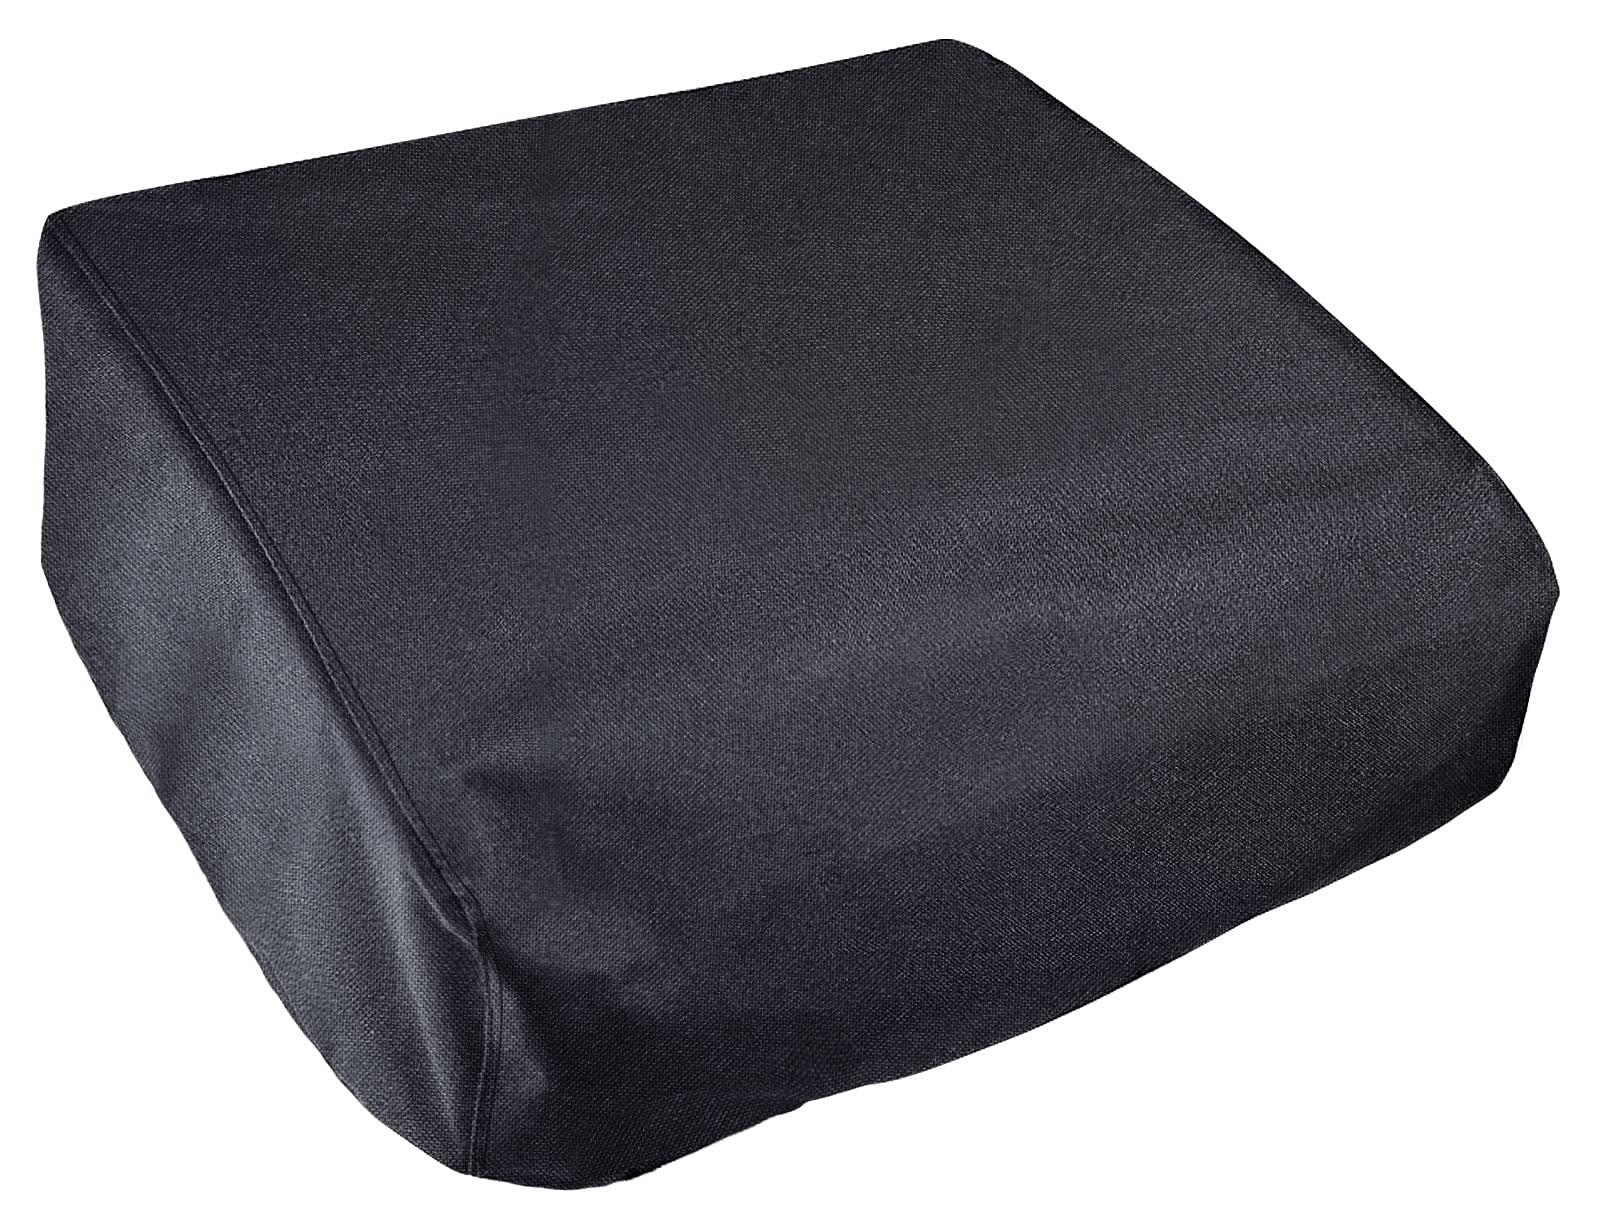 i cOVER griddle cover for Blackstone 22inch Tabletop griddle, 600D Heavy Duty Waterproof canvas Flat Top gas grill cover